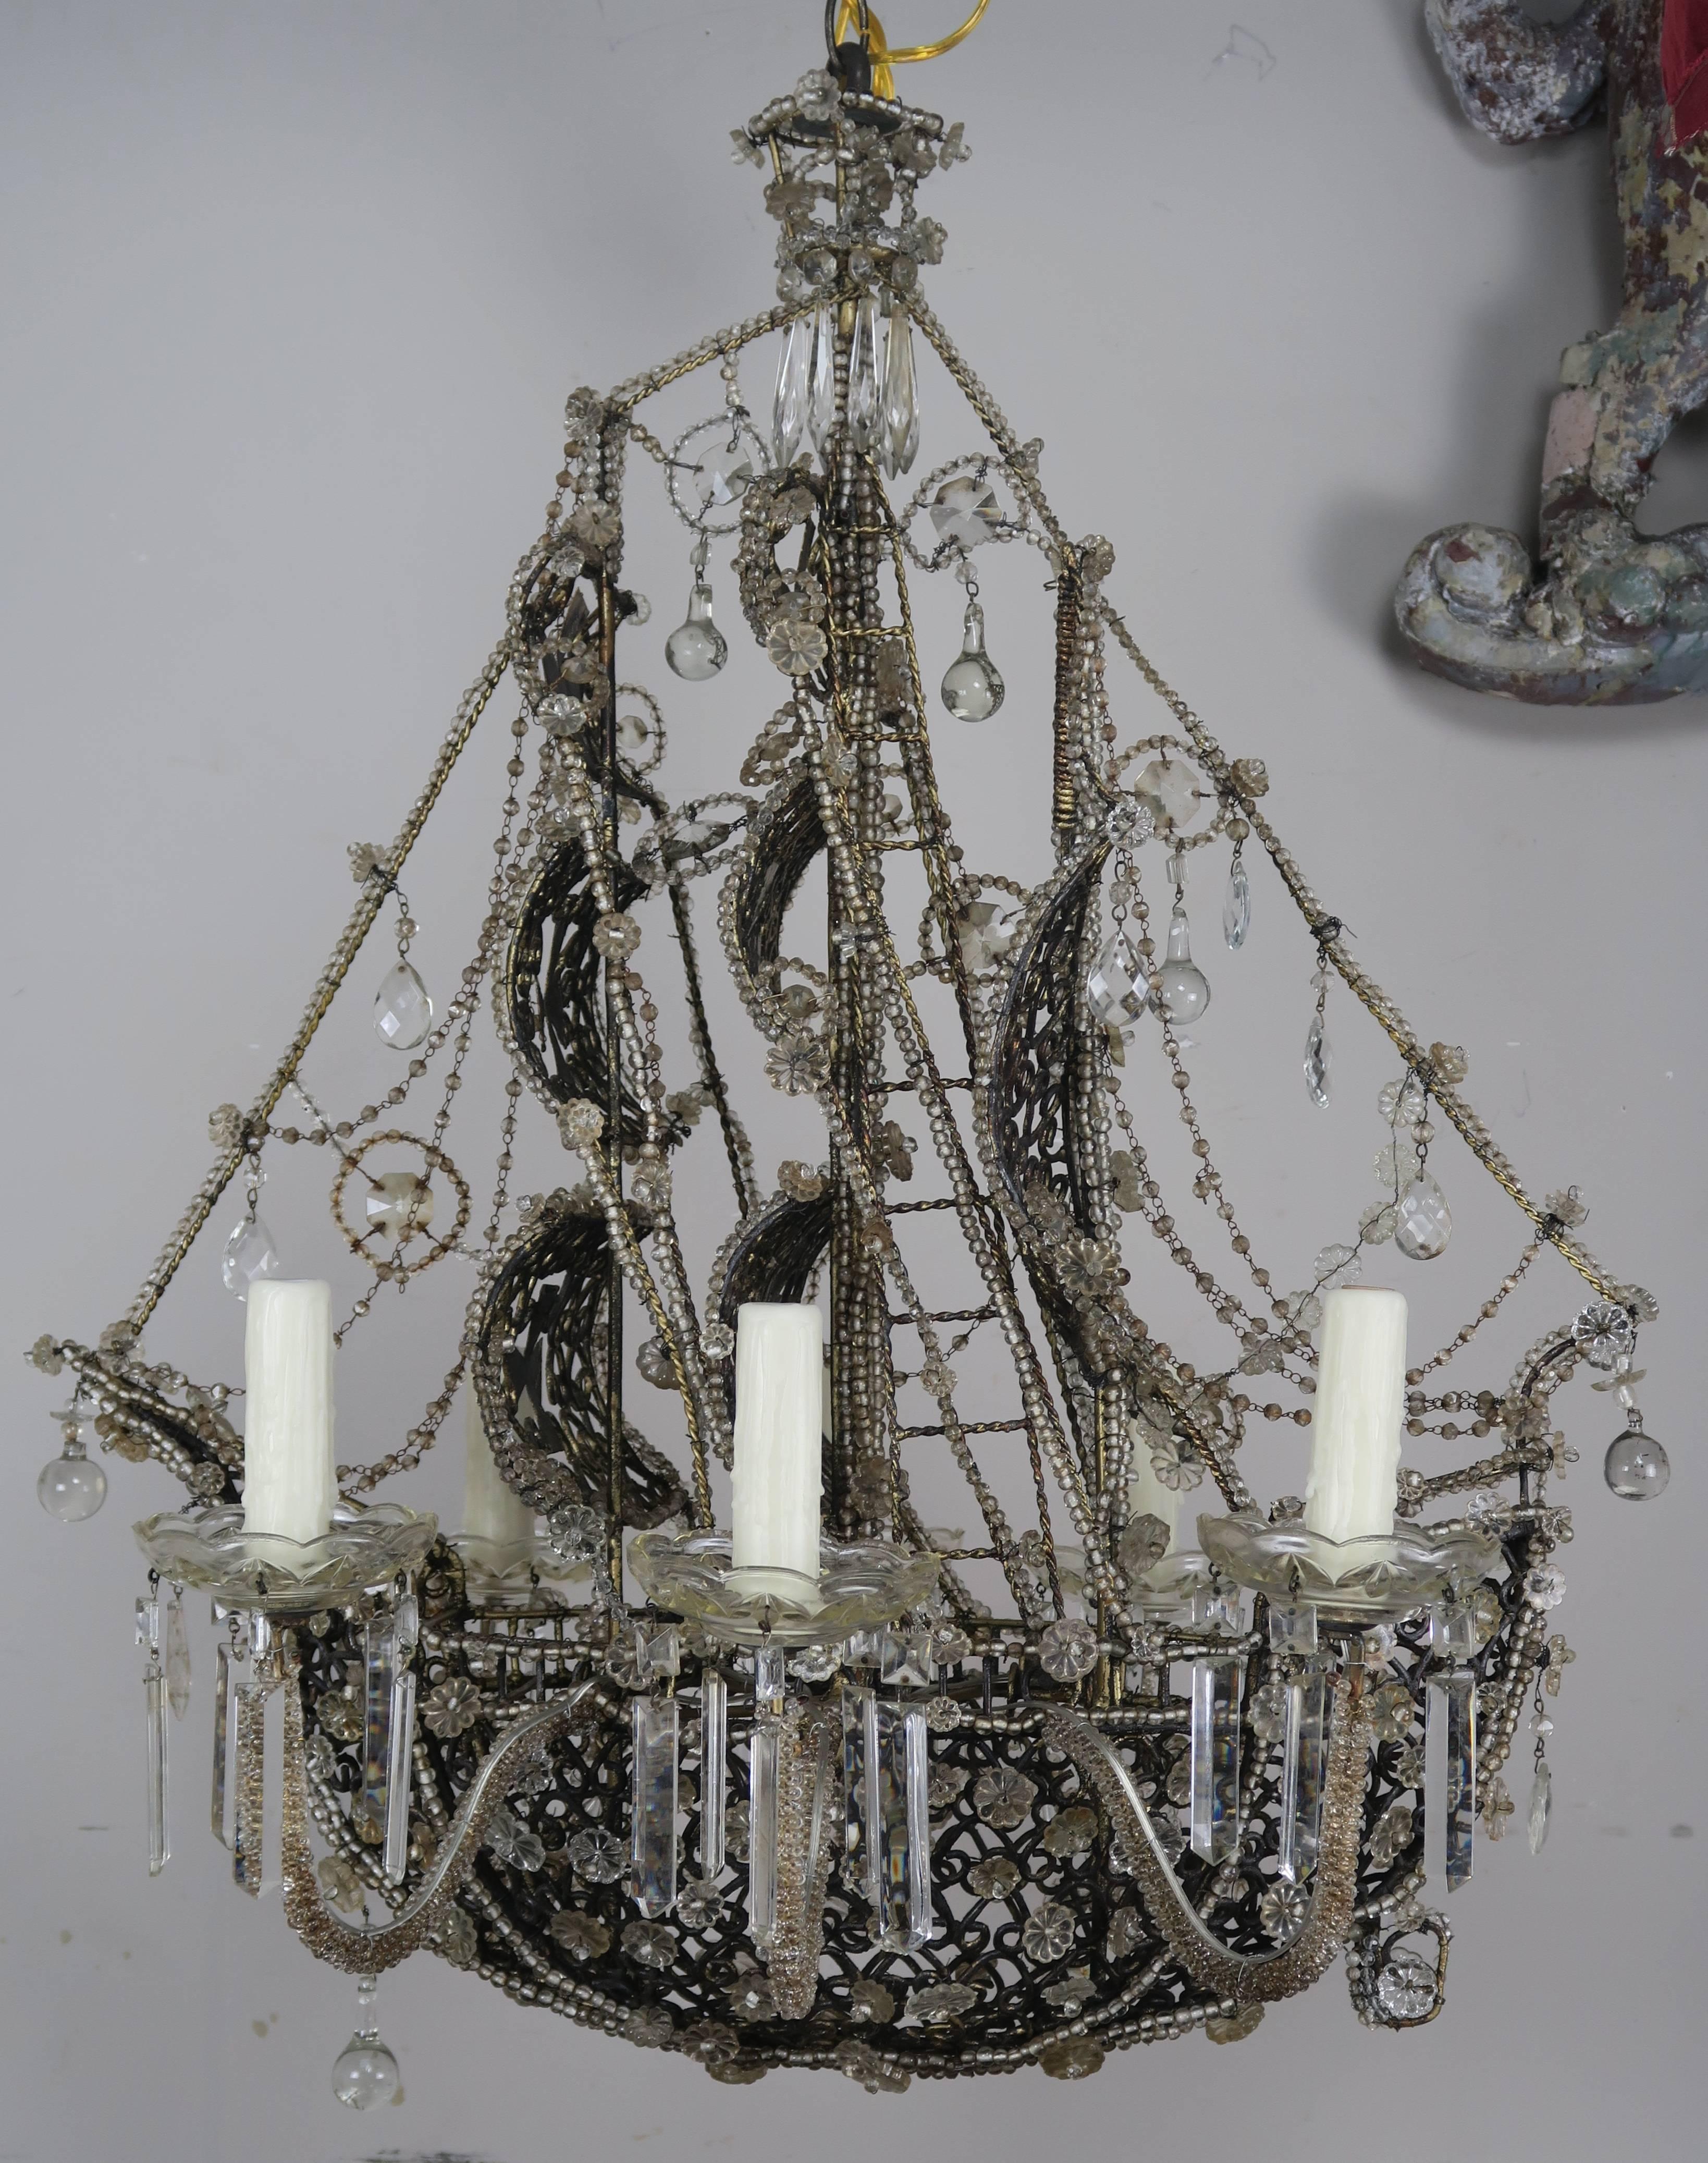 Unique French six-light crystal beaded ship chandelier newly rewired with drip wax candle covers. Incredible details. Includes chain and canopy.